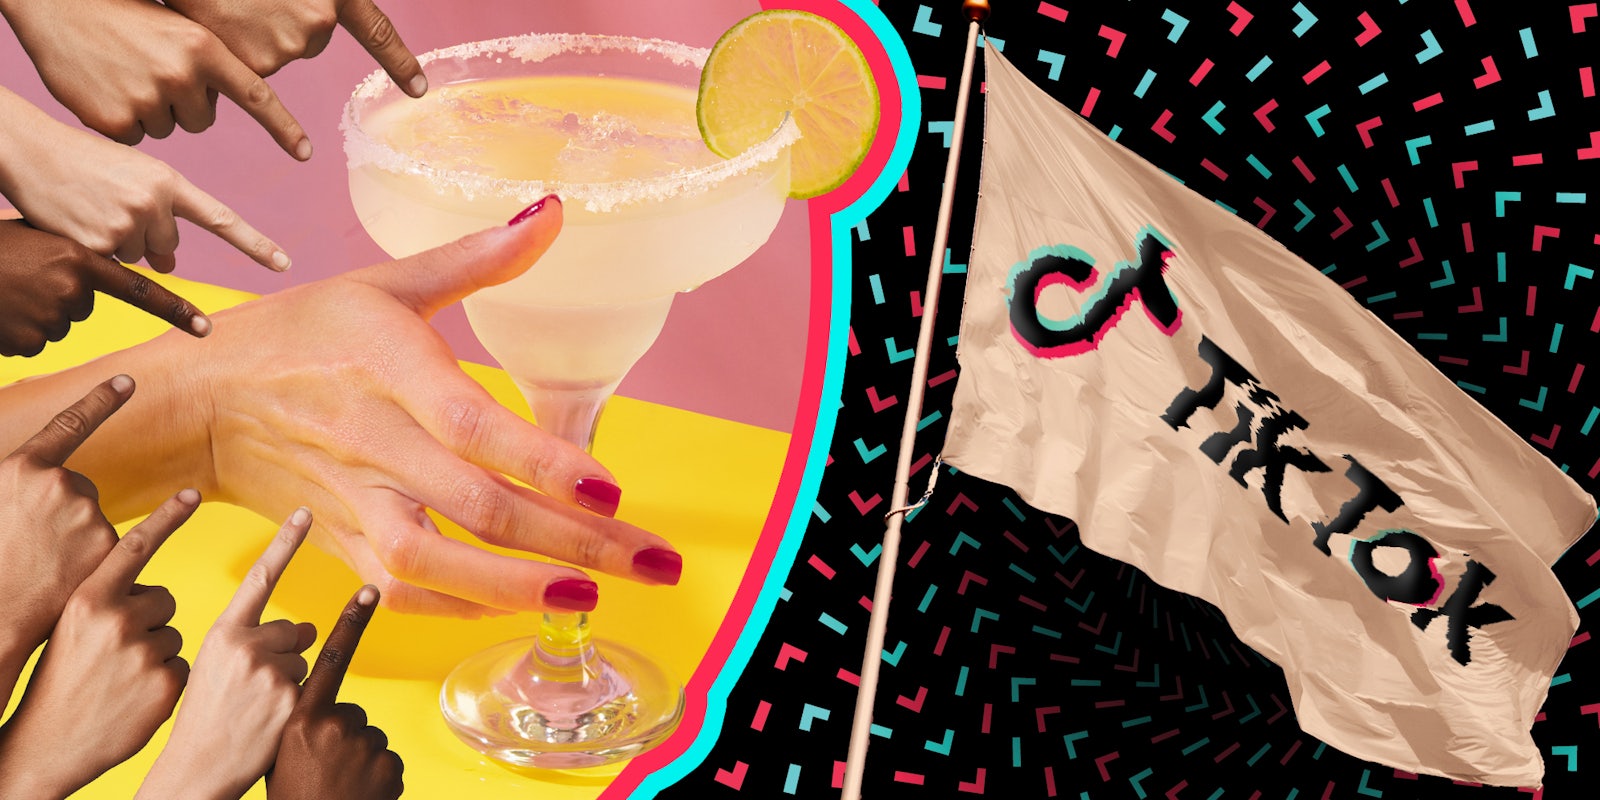 Hands pointing at hand reaching for margarita(l), Beige flag with tiktok logo(r)